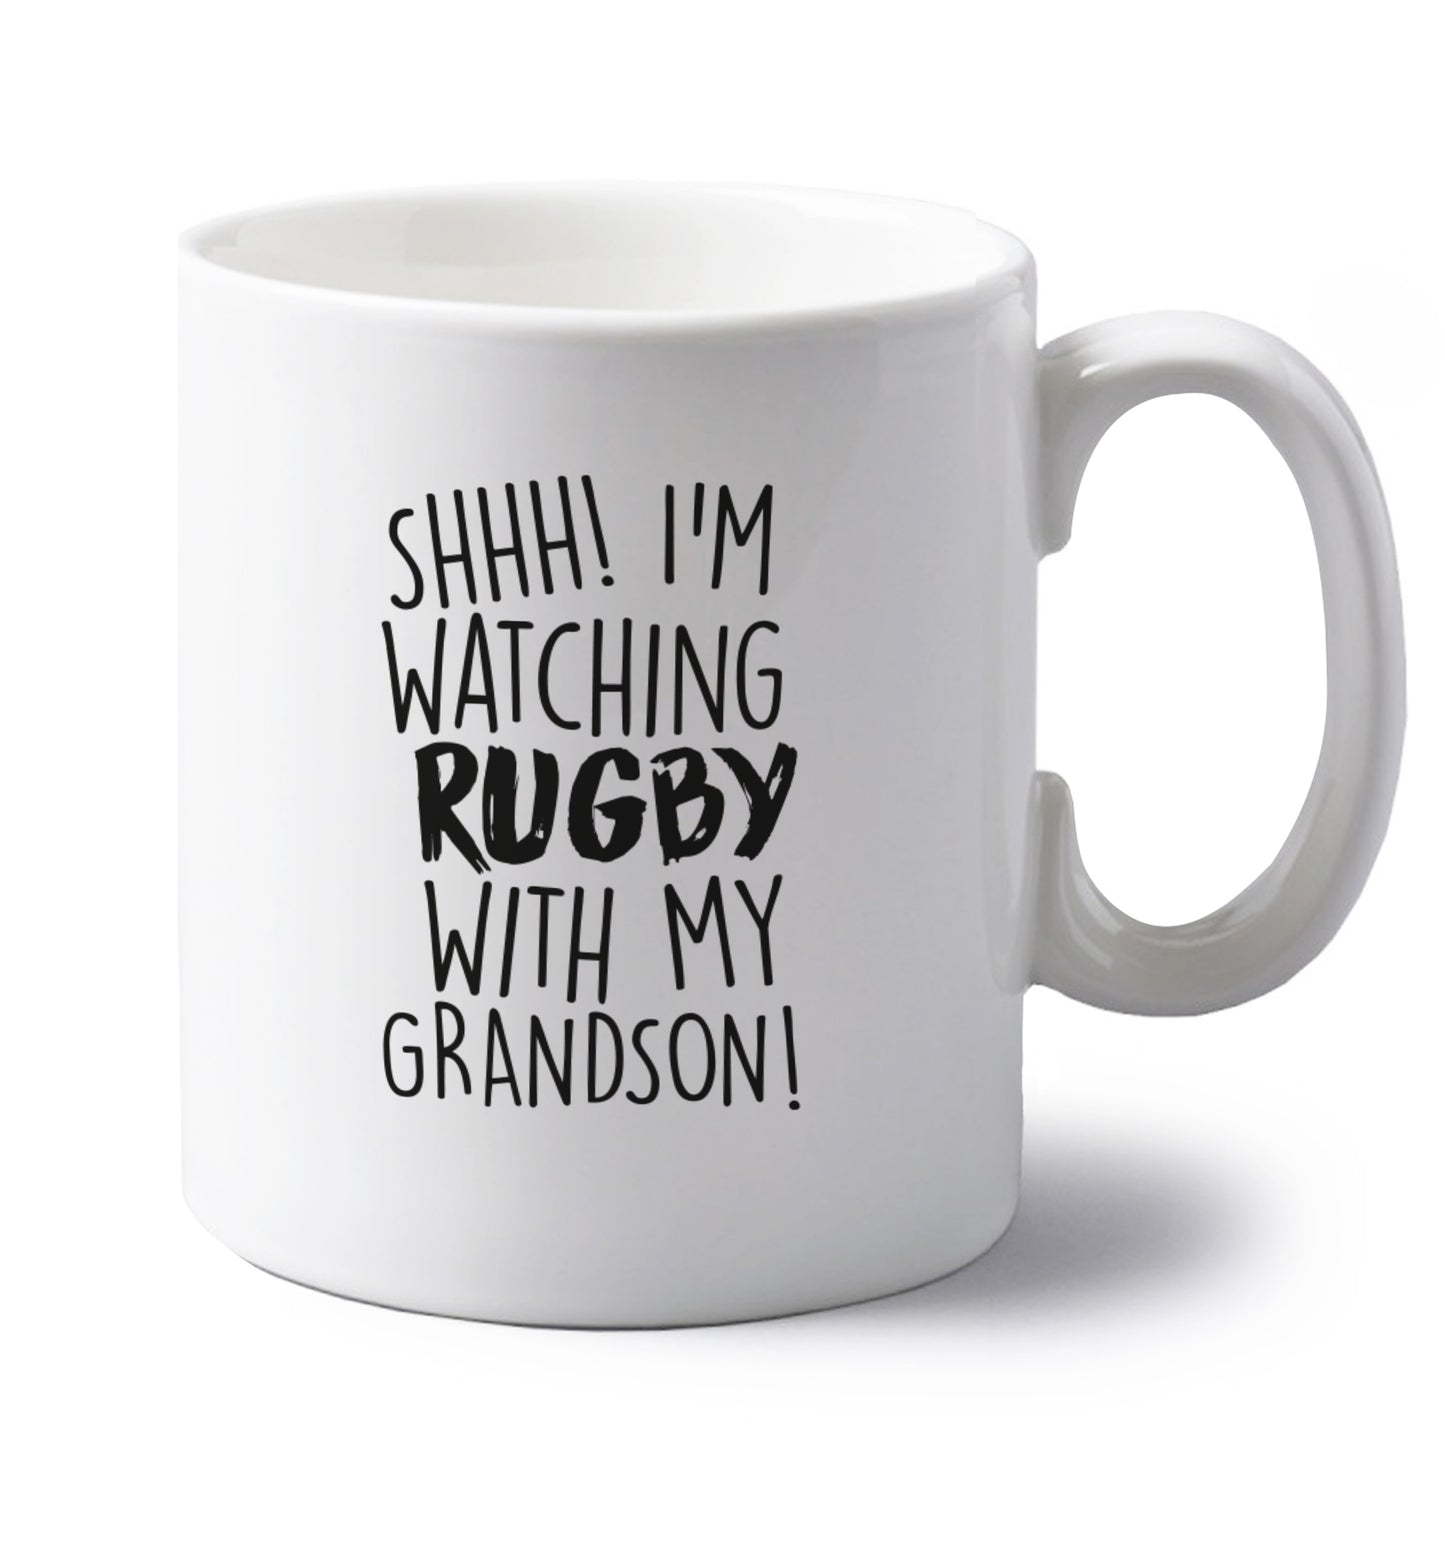 Shh... I'm watching rugby with my dad left handed white ceramic mug 